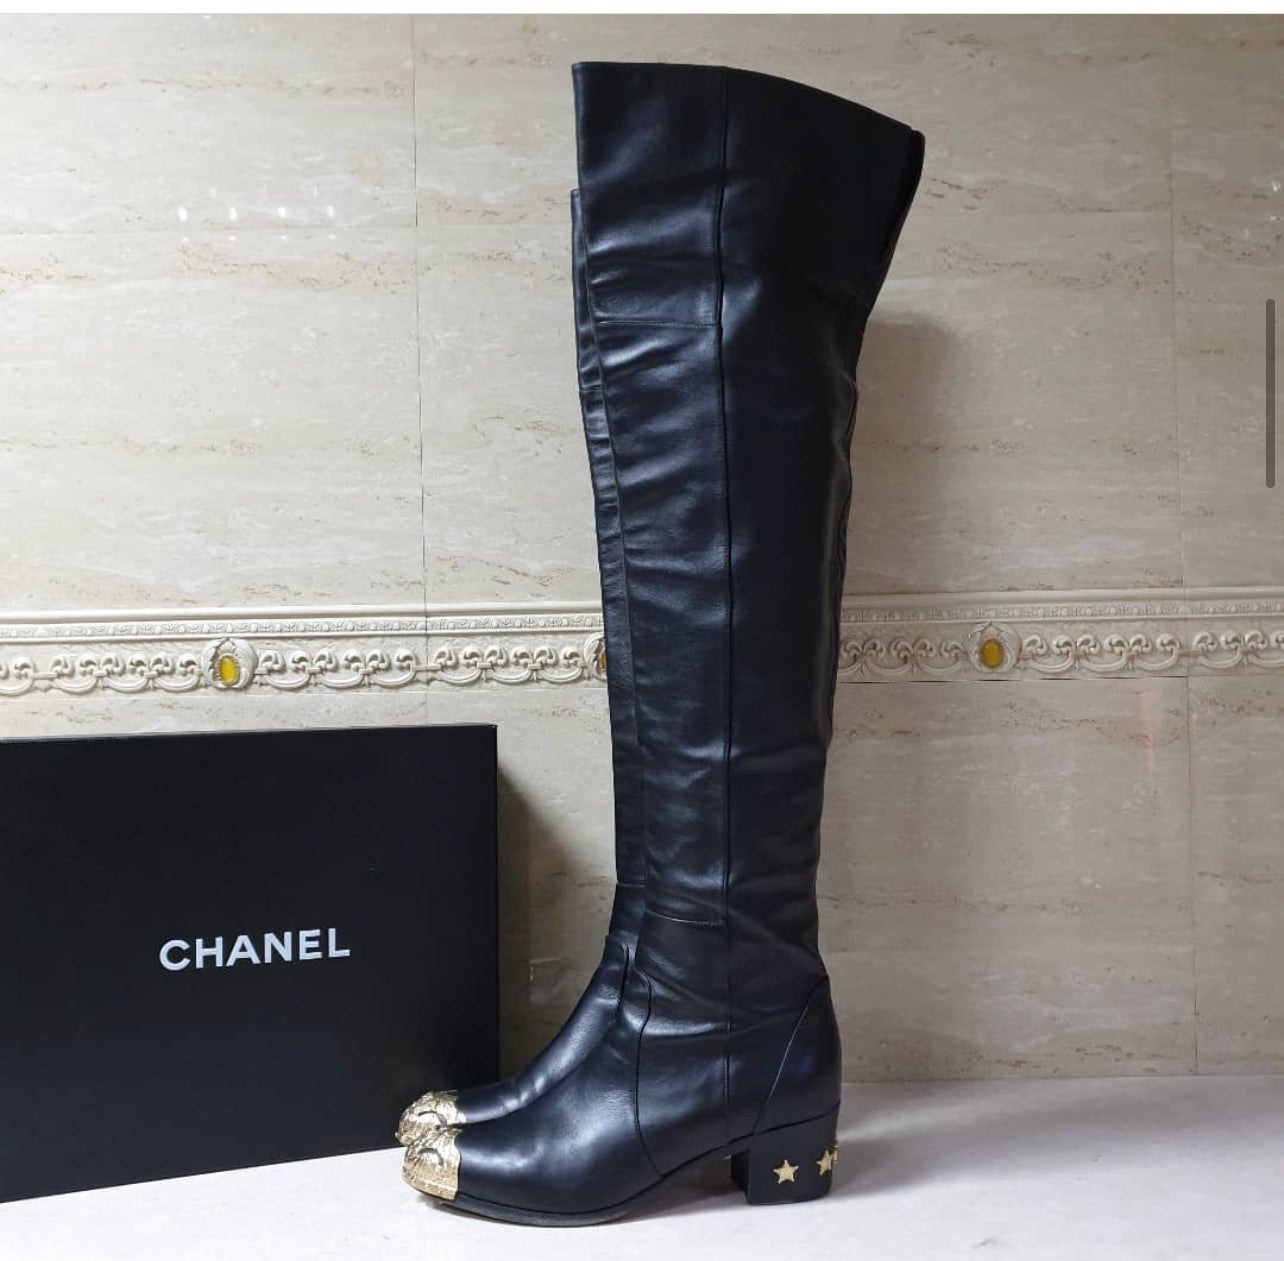 Chanel Black Leather Paris Dallas Metal Cap Toe Thigh High Boots/Booties